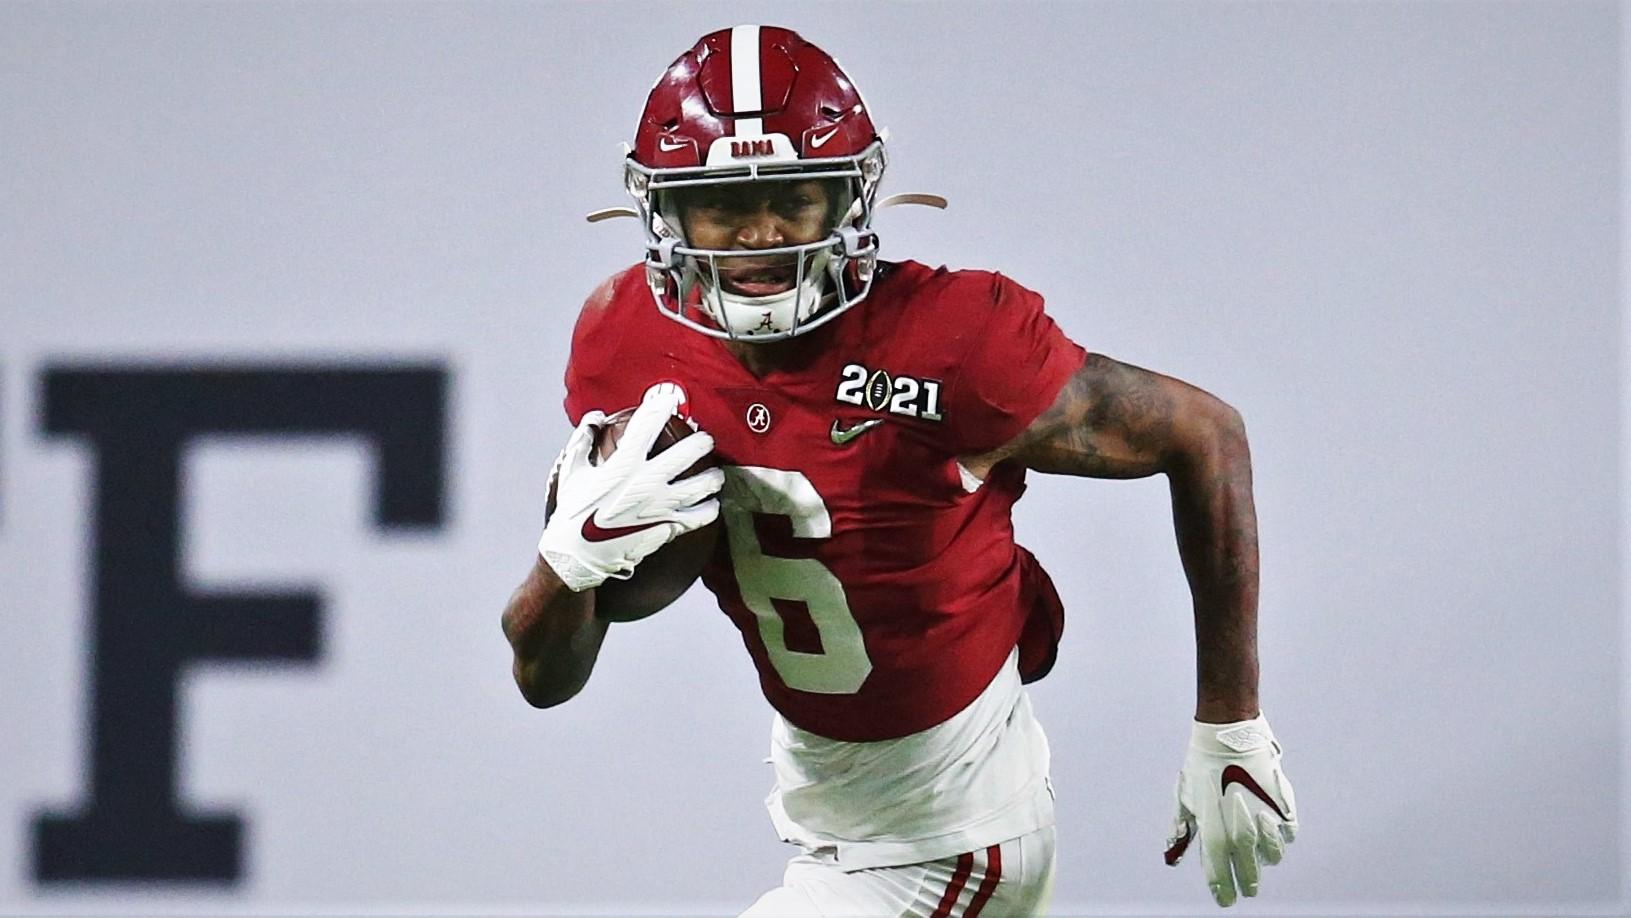 Alabama Crimson Tide wide receiver DeVonta Smith (6) against the Ohio State Buckeyes in the 2021 College Football Playoff National Championship Game. / Mark J. Rebilas-USA TODAY Sports